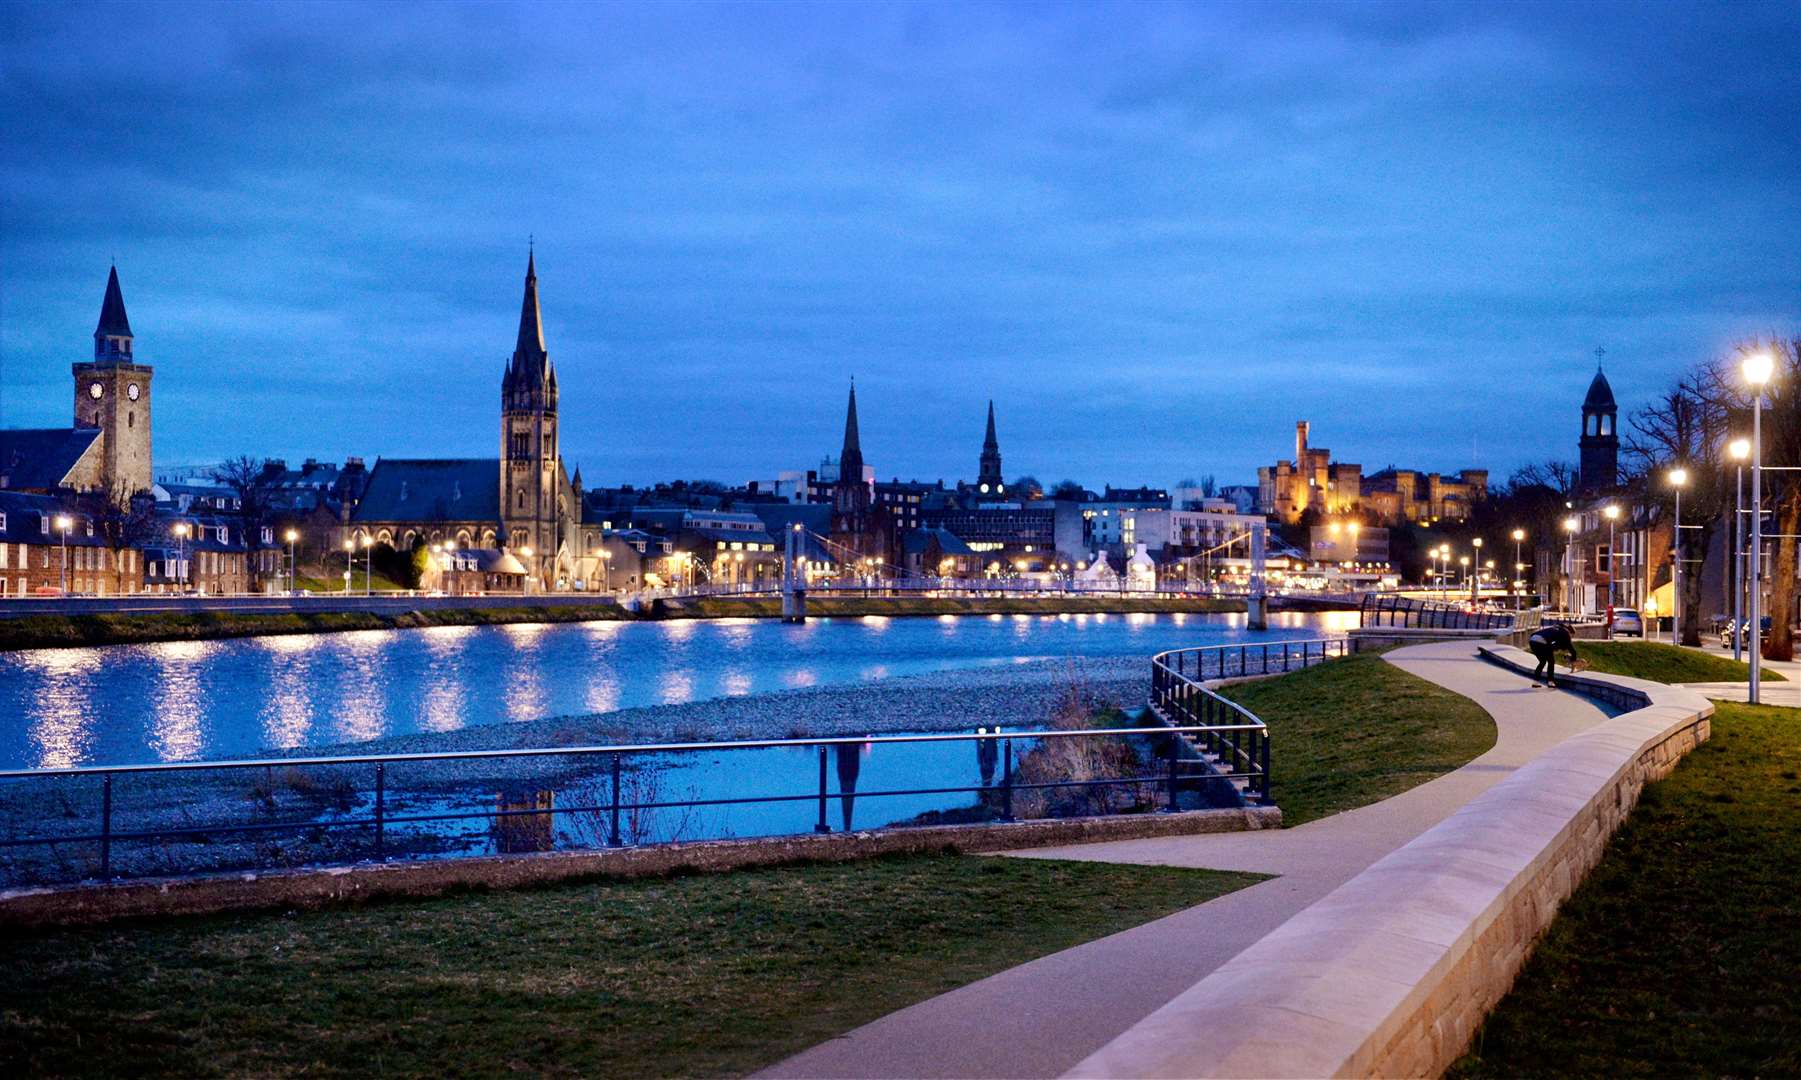 Could Inverness Vision bring a new dawn for city?